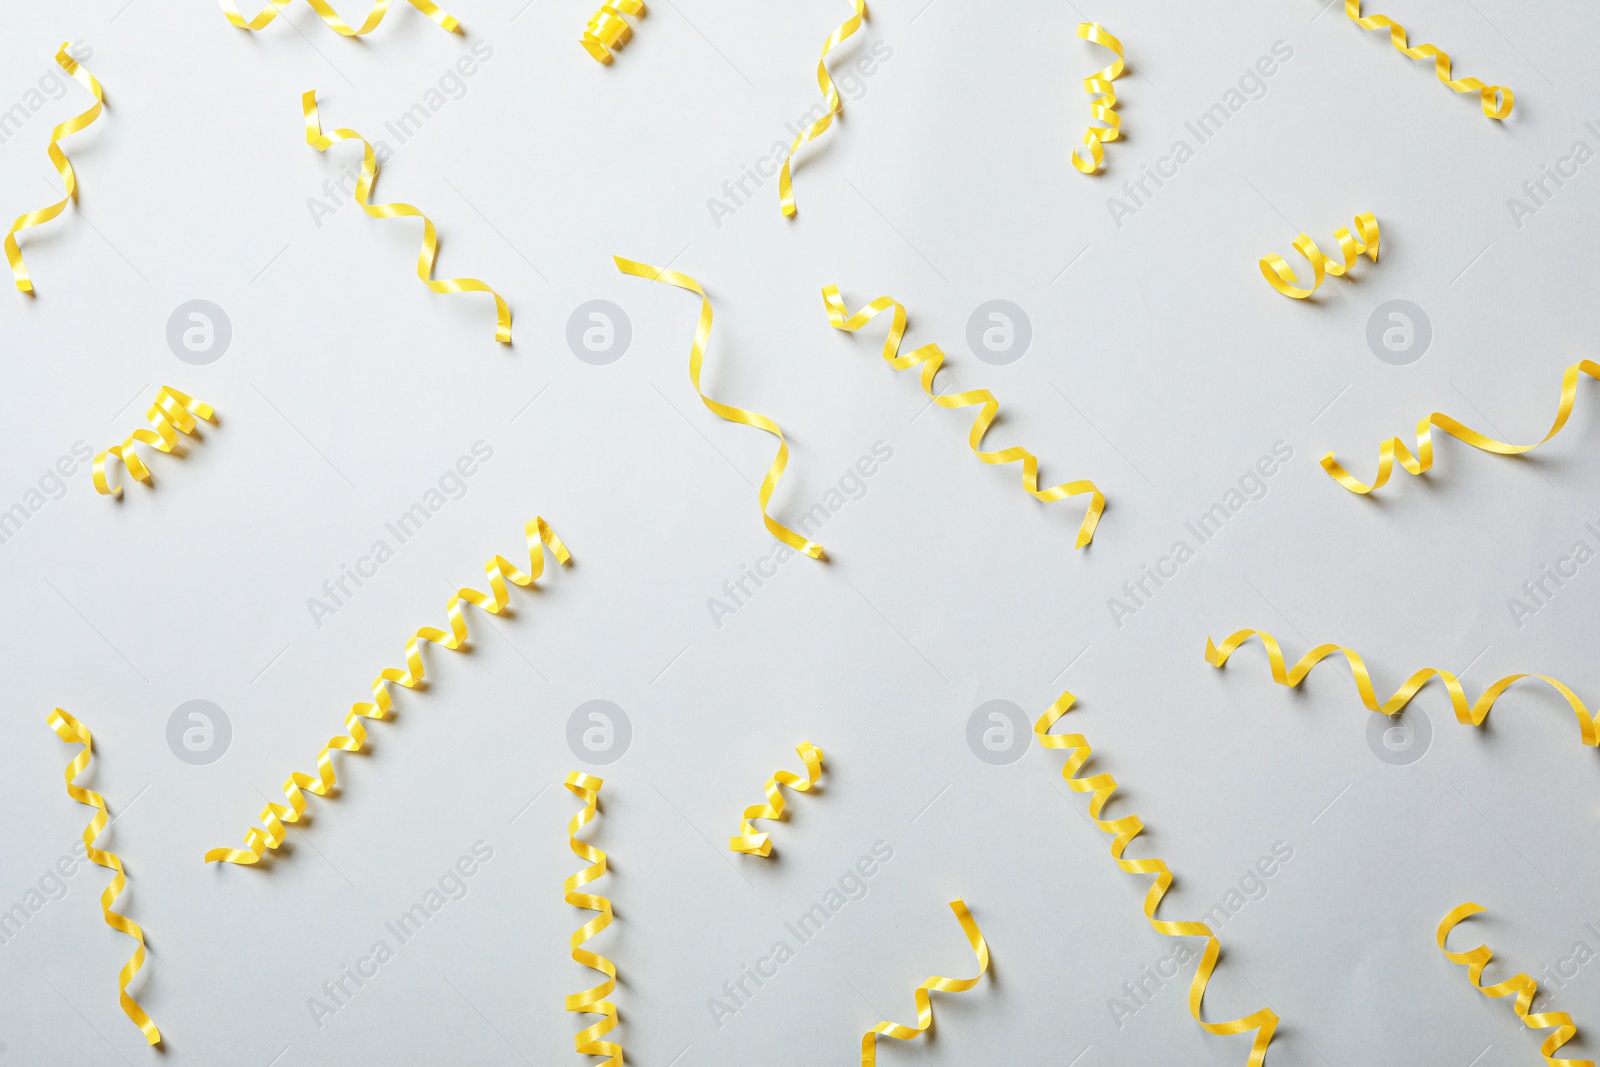 Photo of Yellow serpentine streamers on light background, flat lay